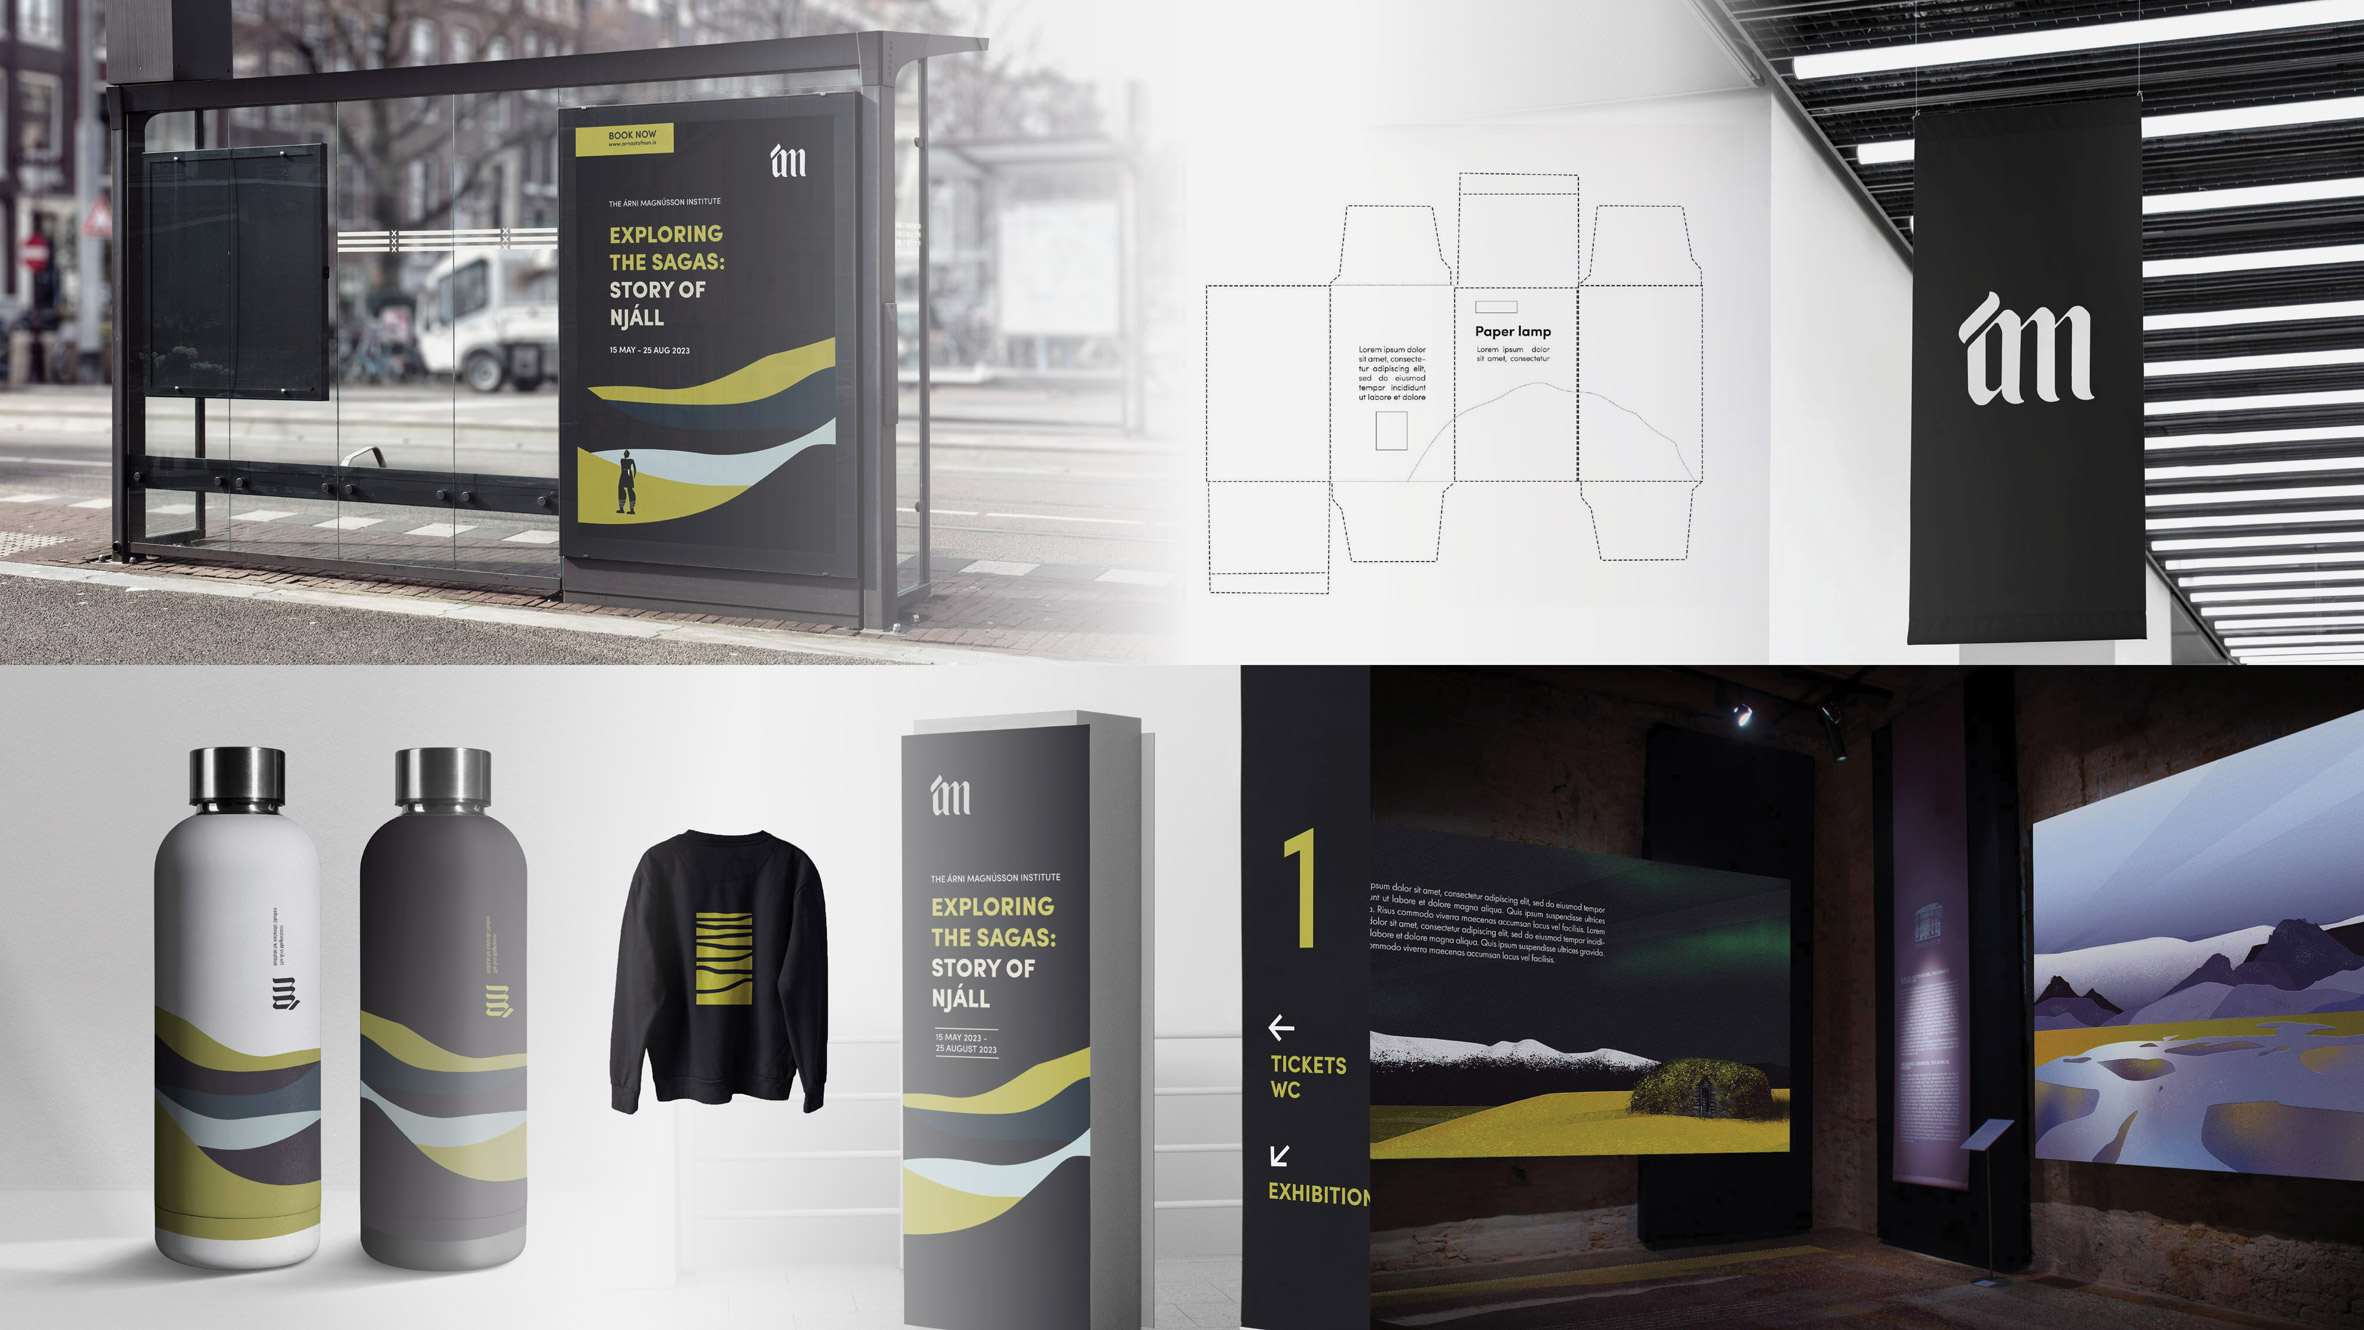 Collage showing a graphic rebrand of an Icelandic museum